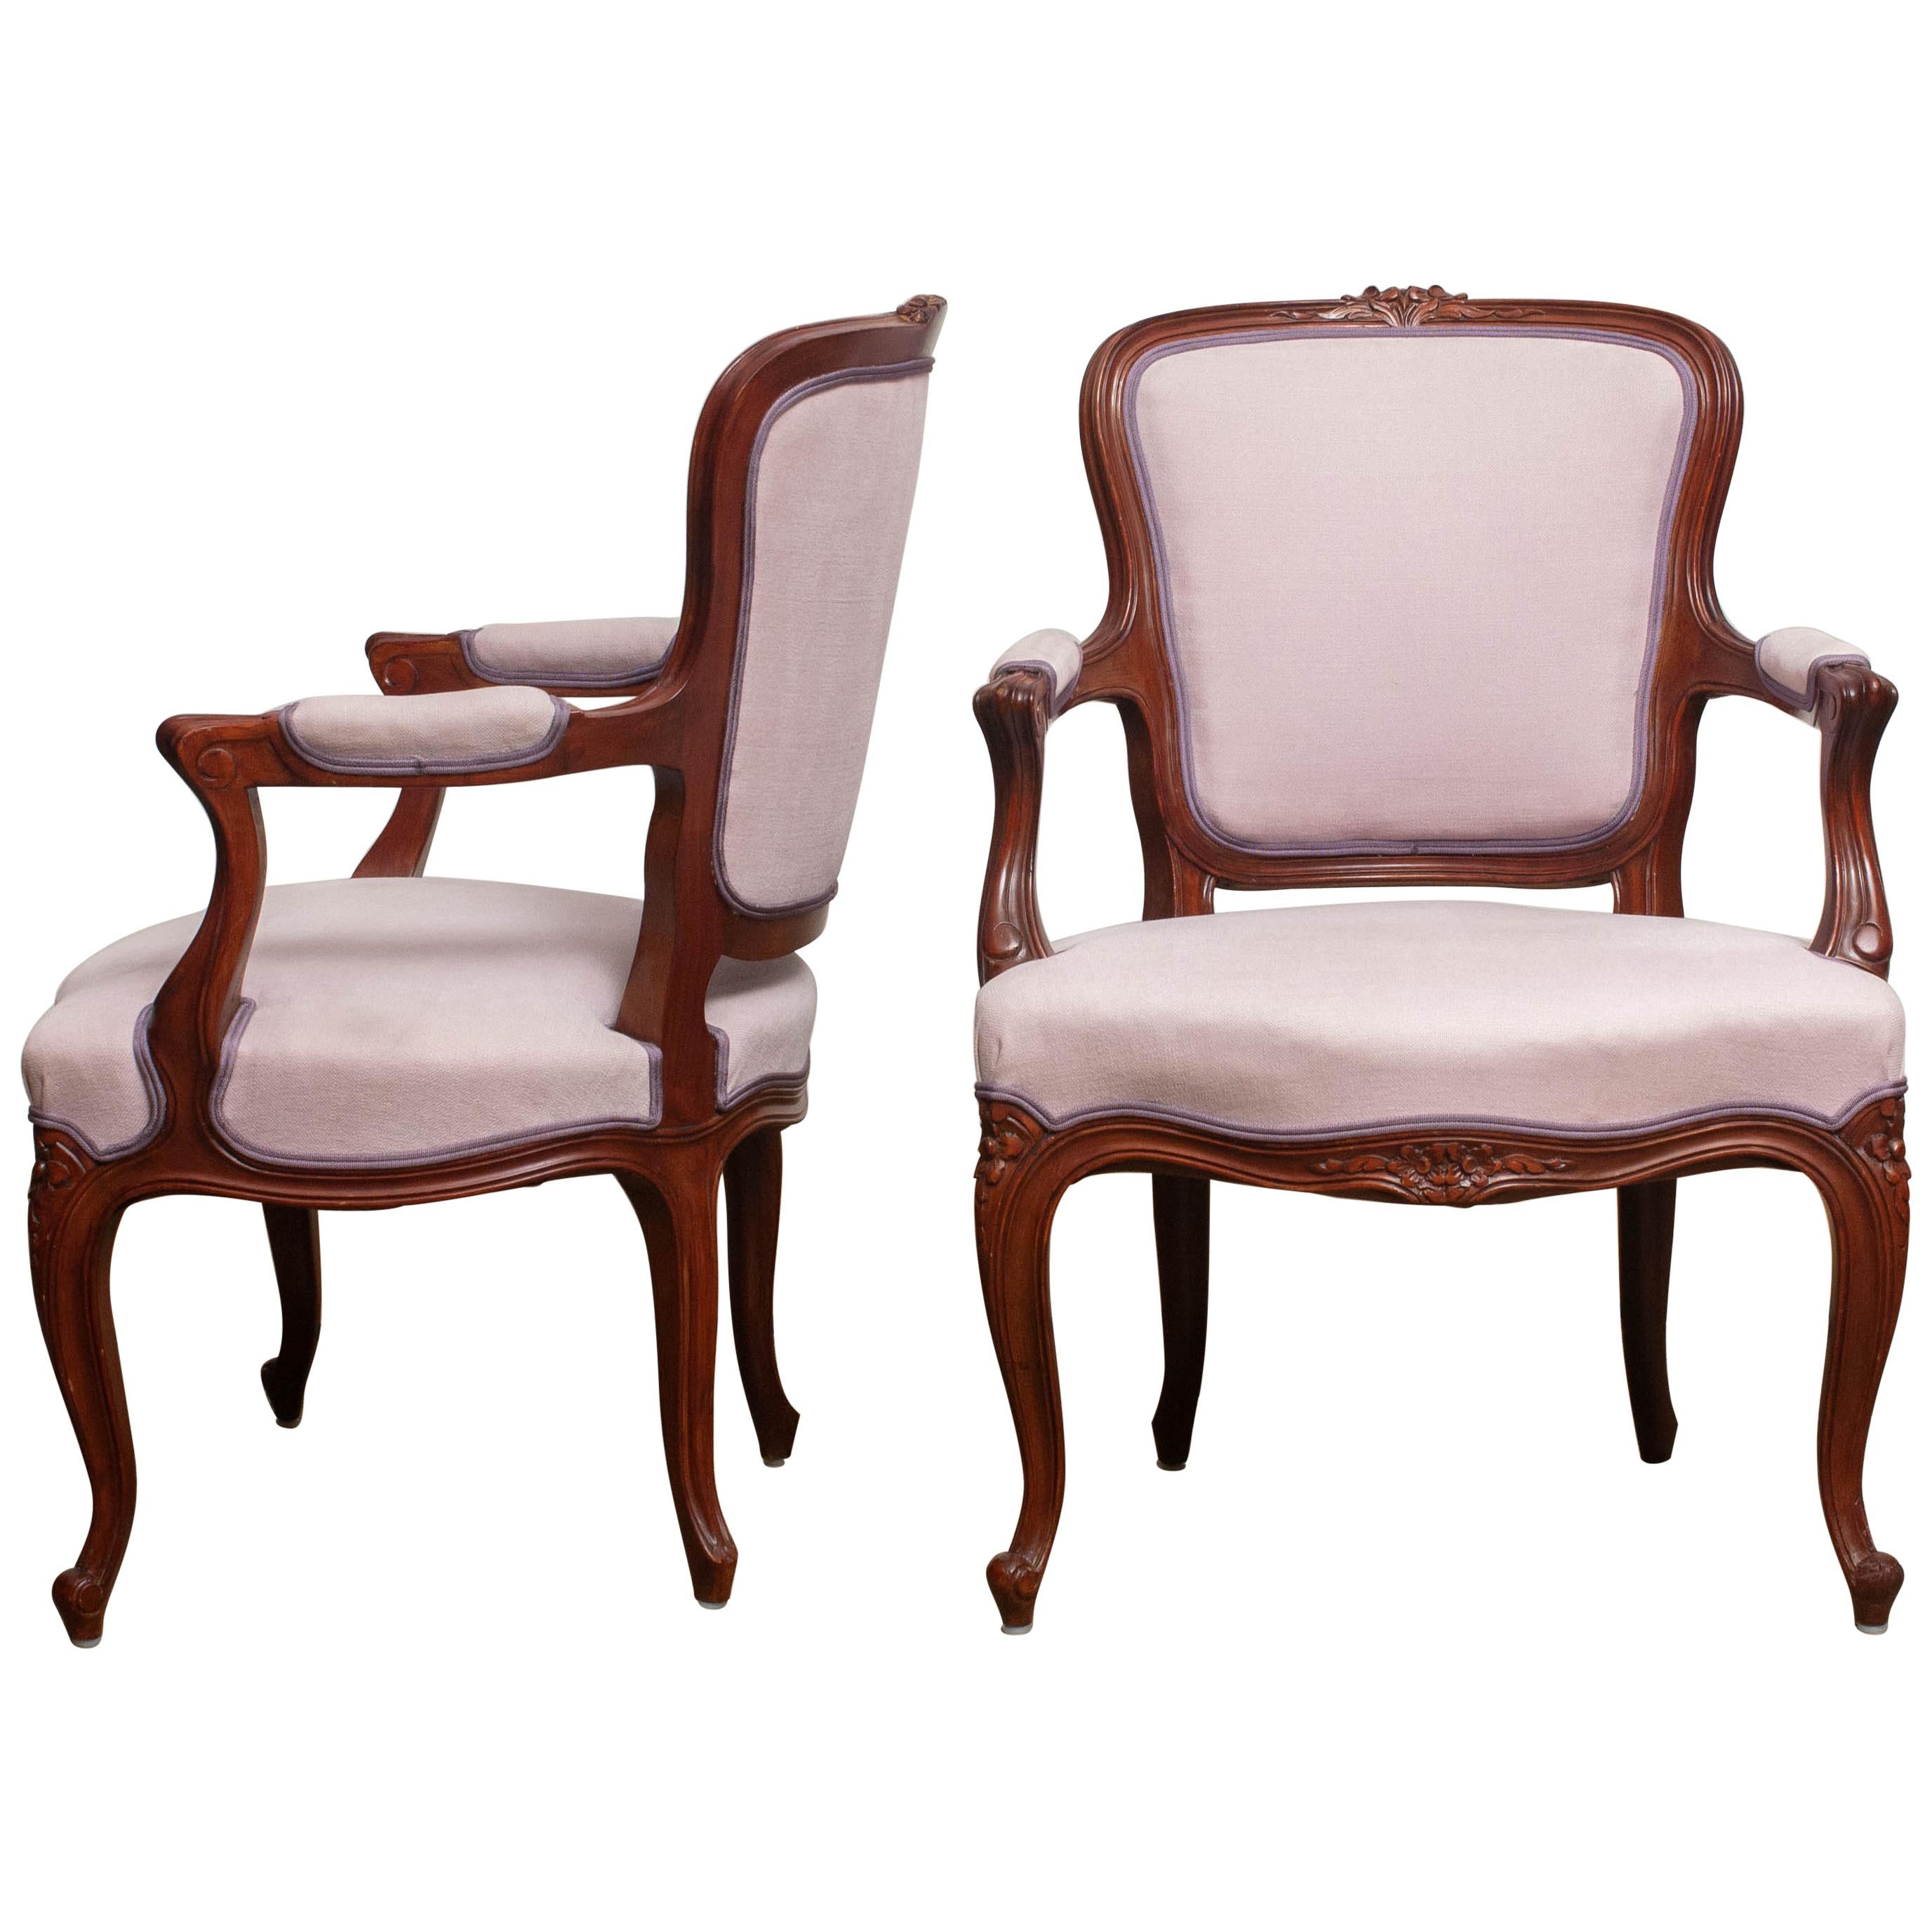 1950s Pair of Pink Swedish Rococo Bergère in the Shabby Chic Technique Chairs F In Good Condition In Silvolde, Gelderland